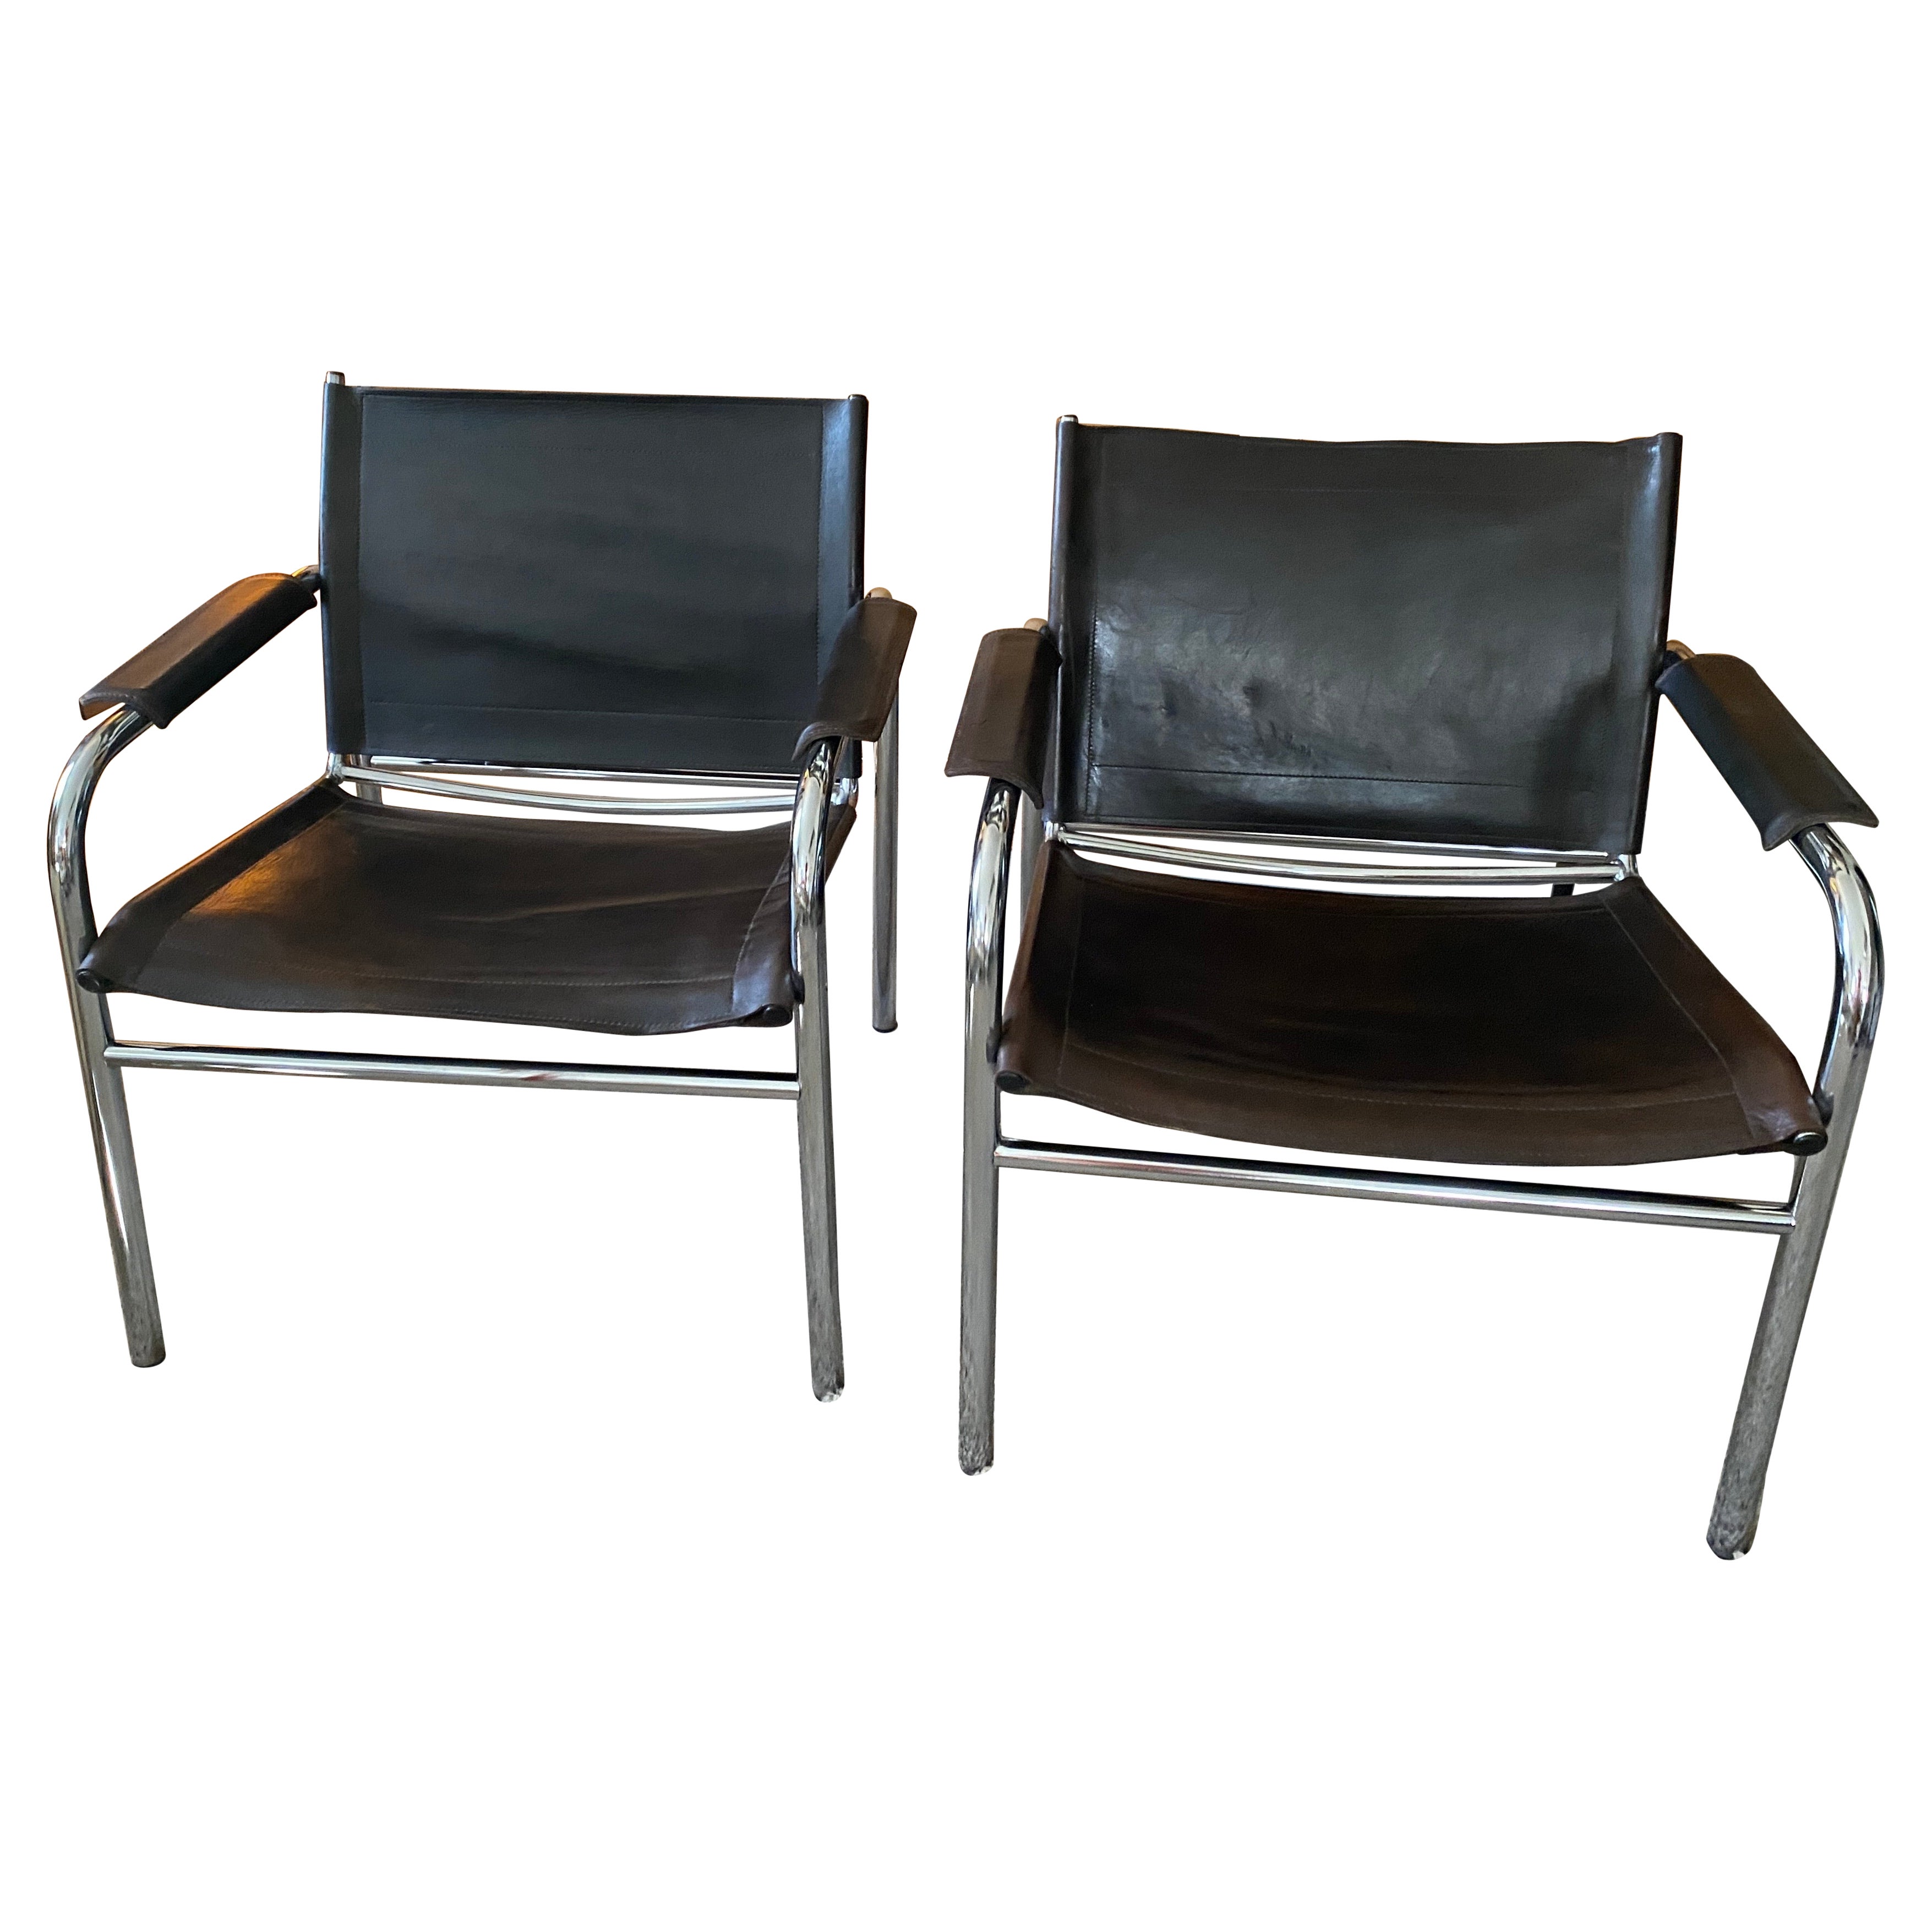 Pair of Vintage Klinte Armchairs by Tord Bjorklund for Ikea, 1980 For Sale